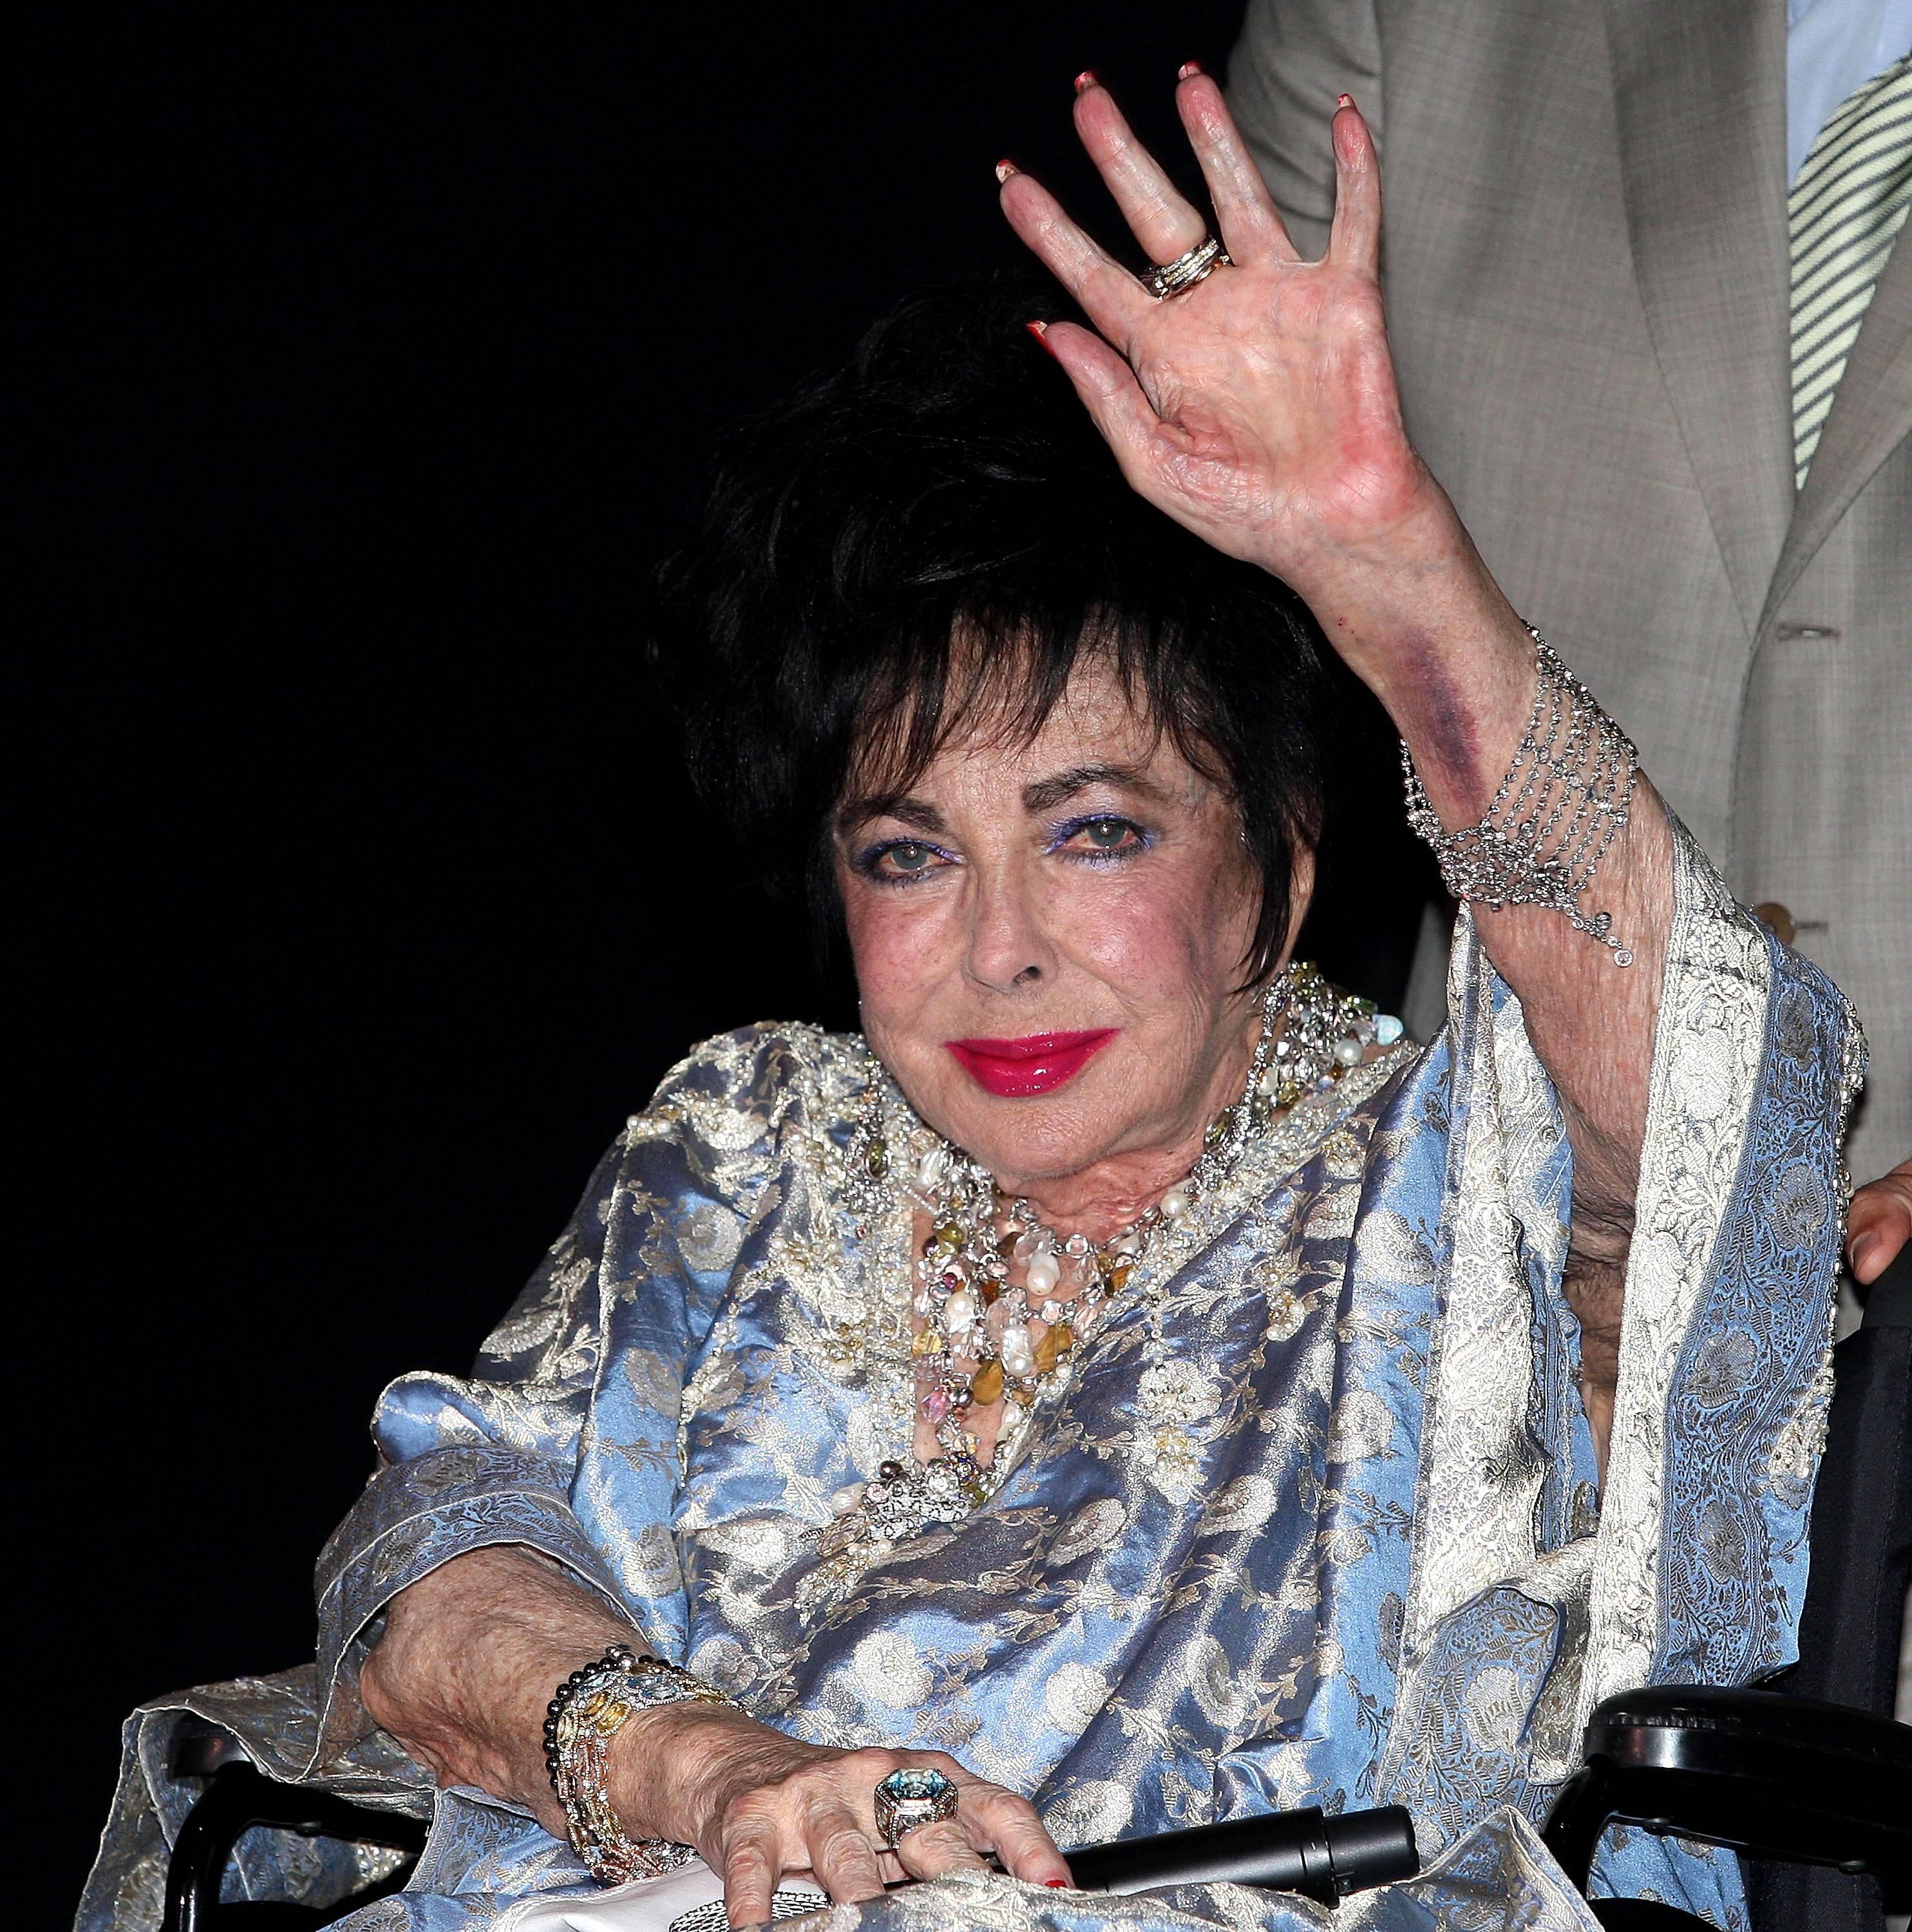 Elizabeth Taylor Dies - On Wednesday, legendary actress Elizabeth Taylor passed away at a Los Angeles hospital. She was 79. Known for her stunning beauty and eight marriages, Taylor was also a pioneer for AIDS awareness and earned a humanitarian Oscar in 1993 for her efforts. She was also a longtime friend and supporter of Michael Jackson, and stood by his side during tough times. She is survived by four children and 10 grandchildren.(Photo: Frederick M. Brown/Getty Image)